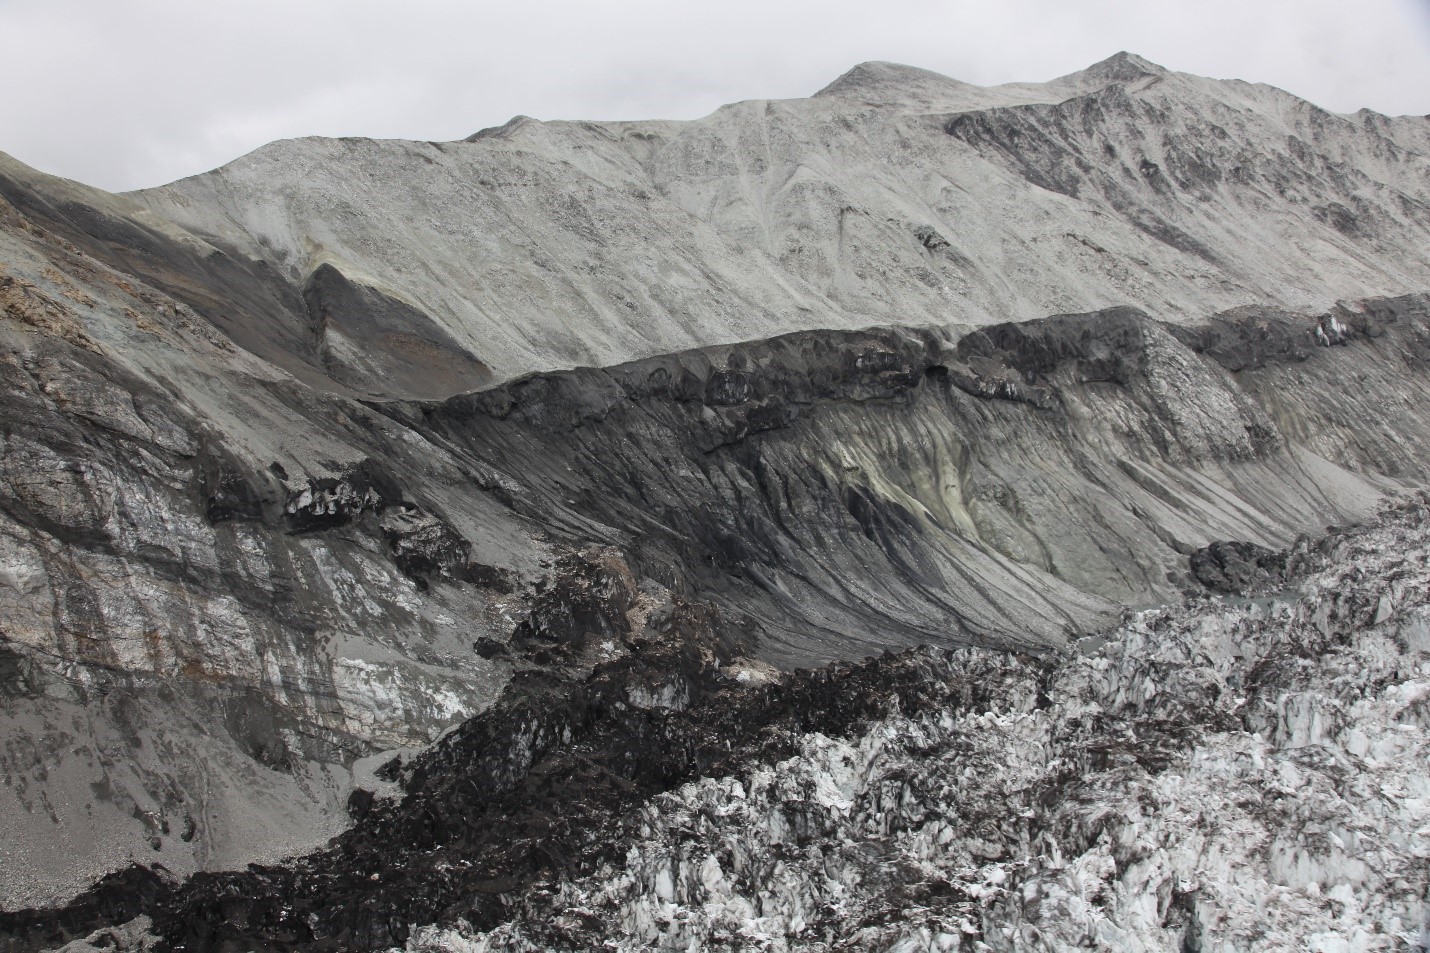 View of a multi-tiered rocky interface between glacier ice and a mountainside.